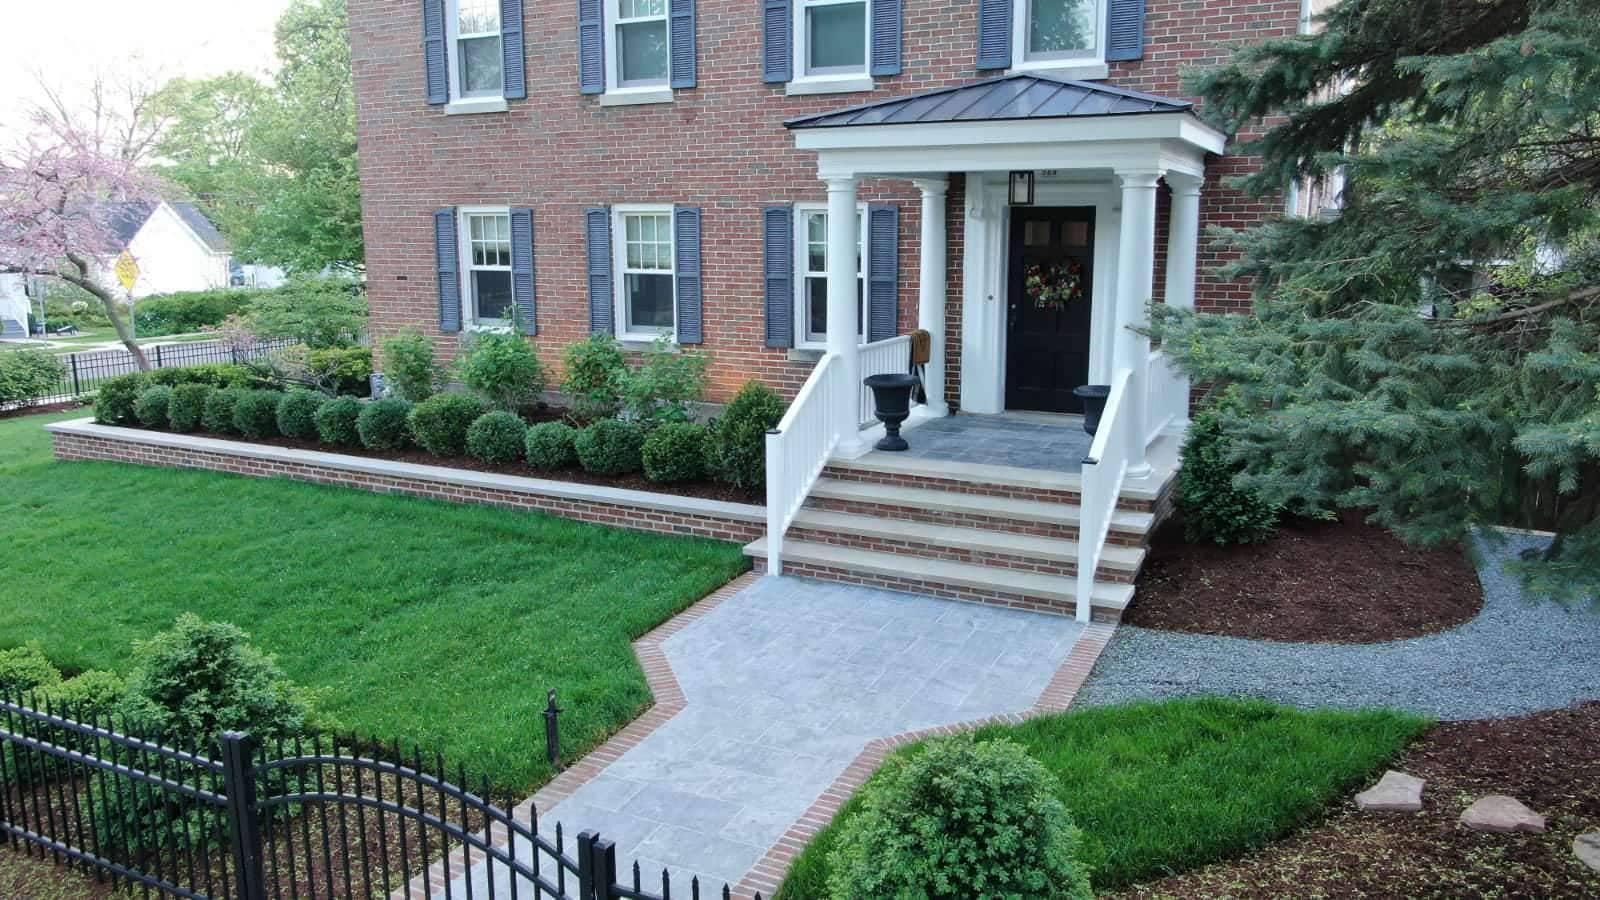 Revamping Your Home's Curb Appeal: A Guide to First Impressions